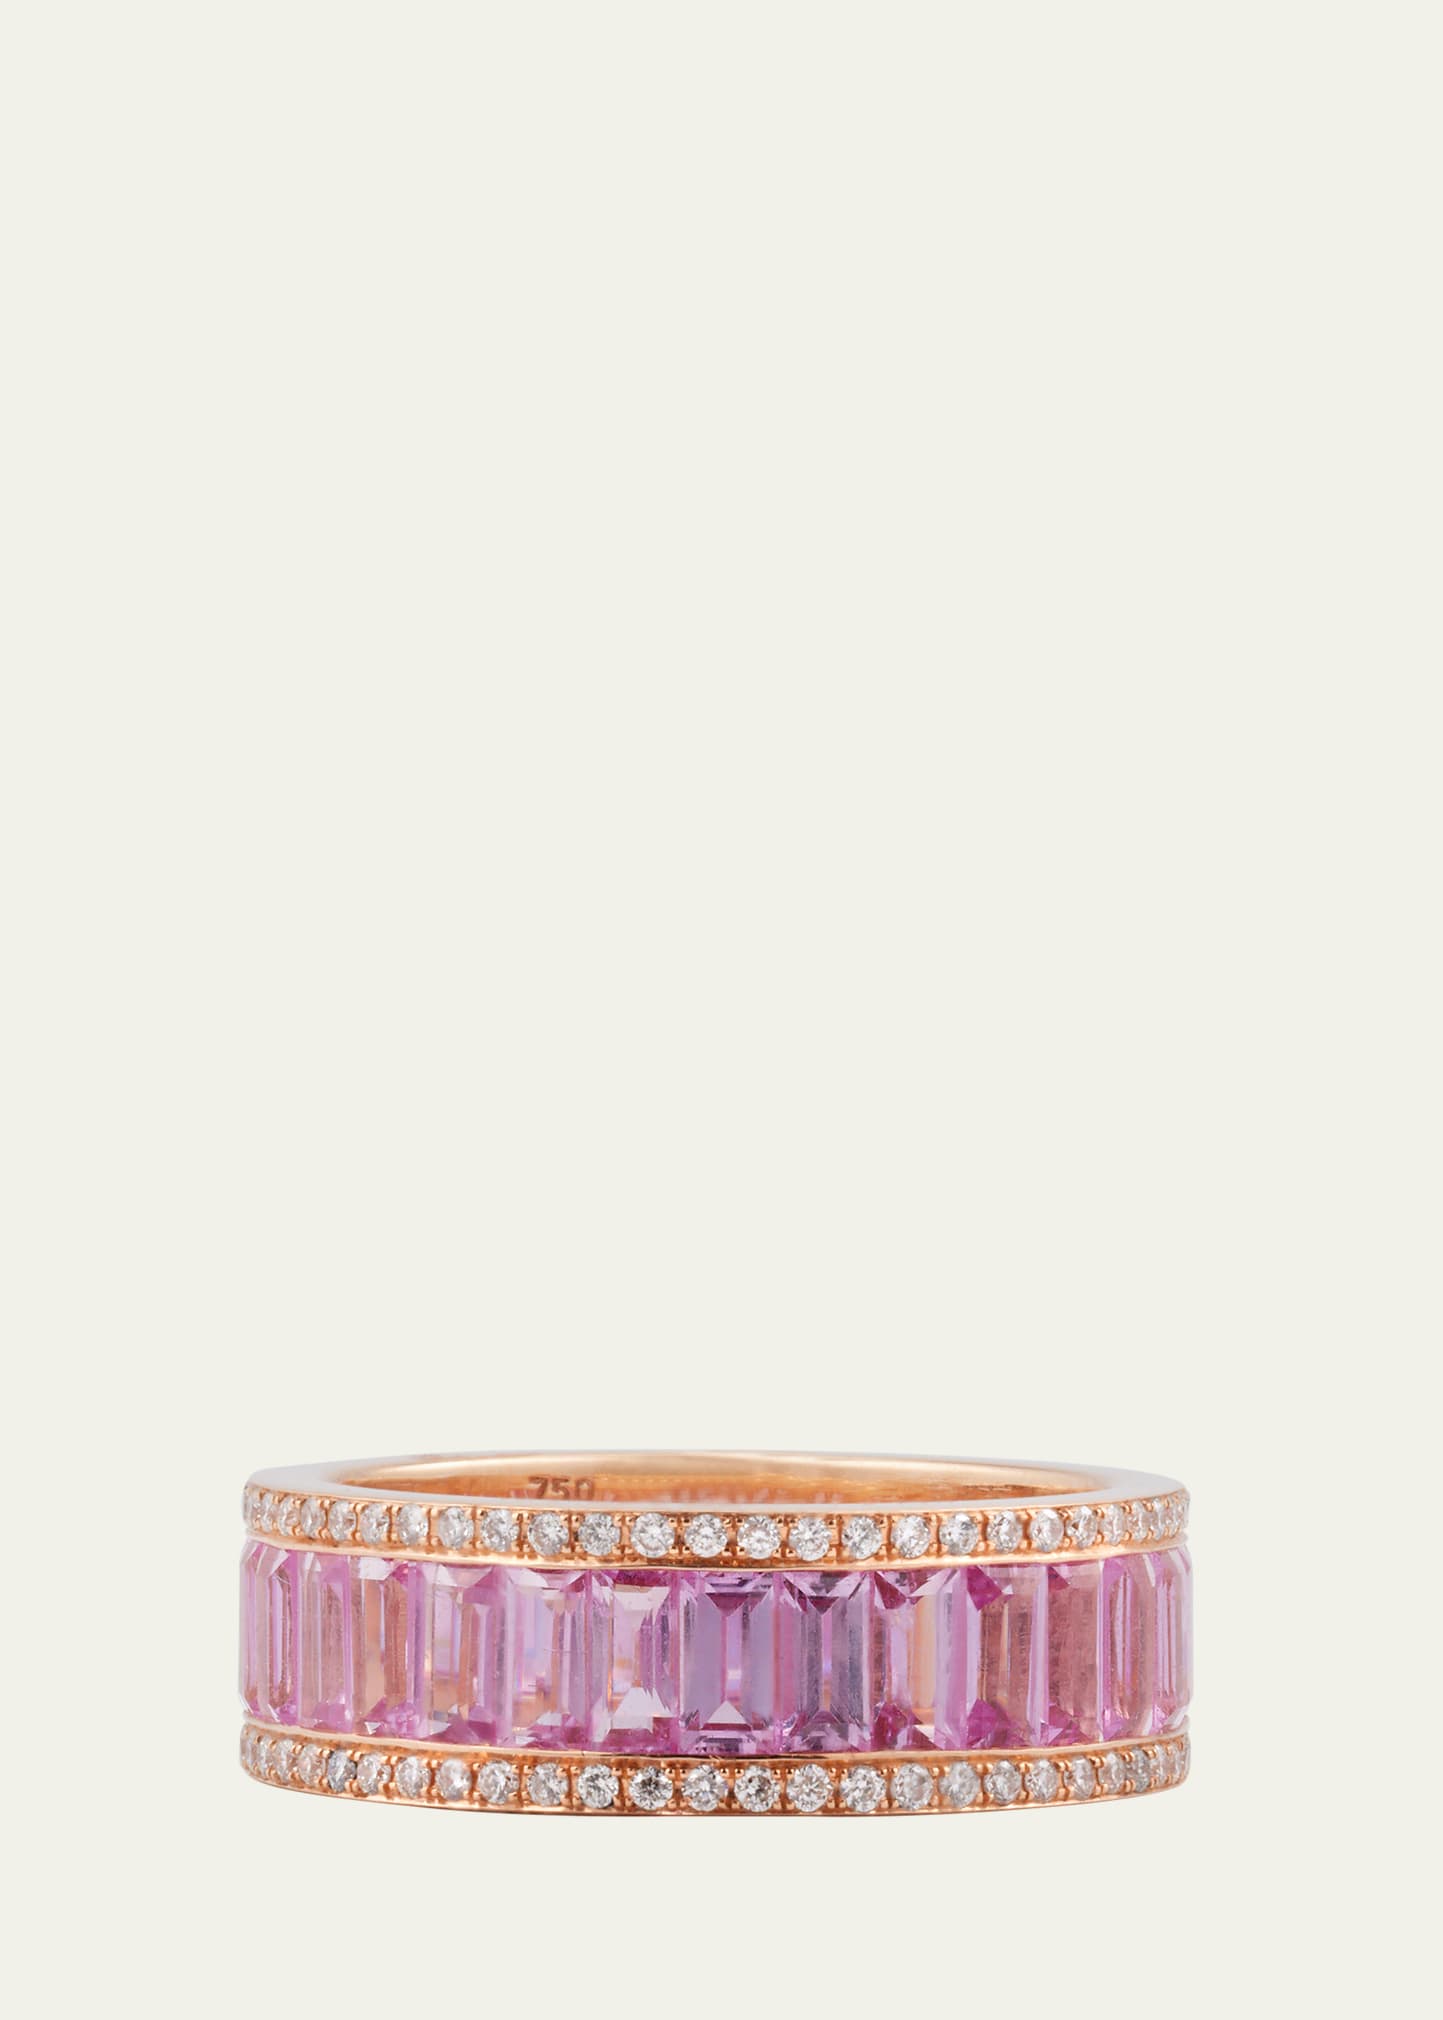 18K Rose Gold Baguette Eternity Ring with Pink Sapphires and Diamonds